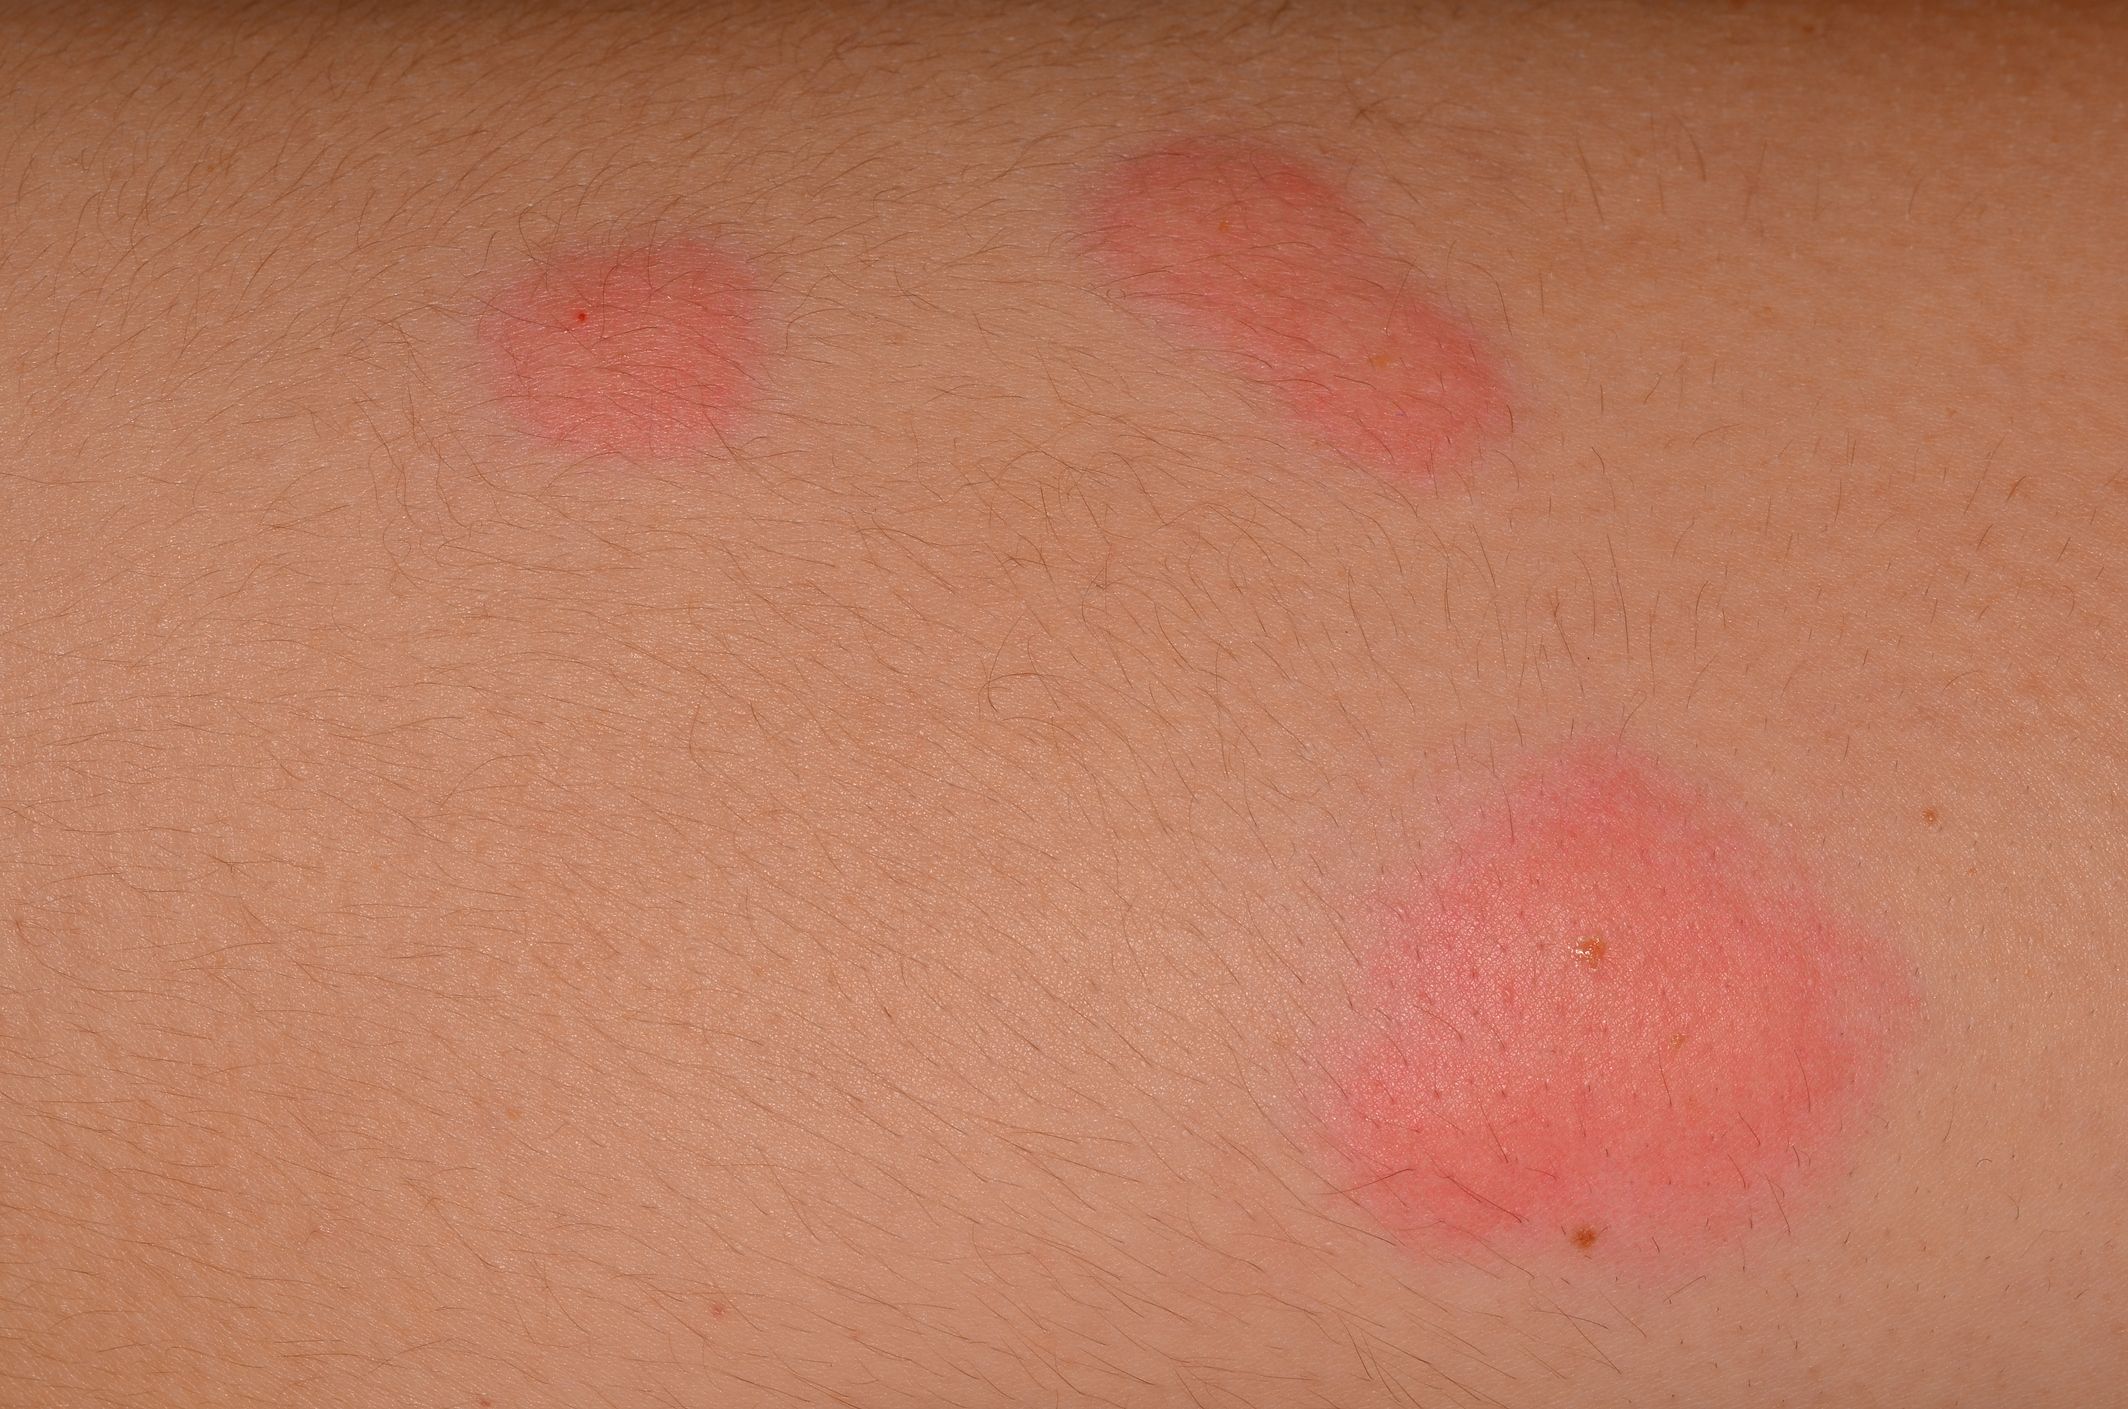 small red bug bites that itch